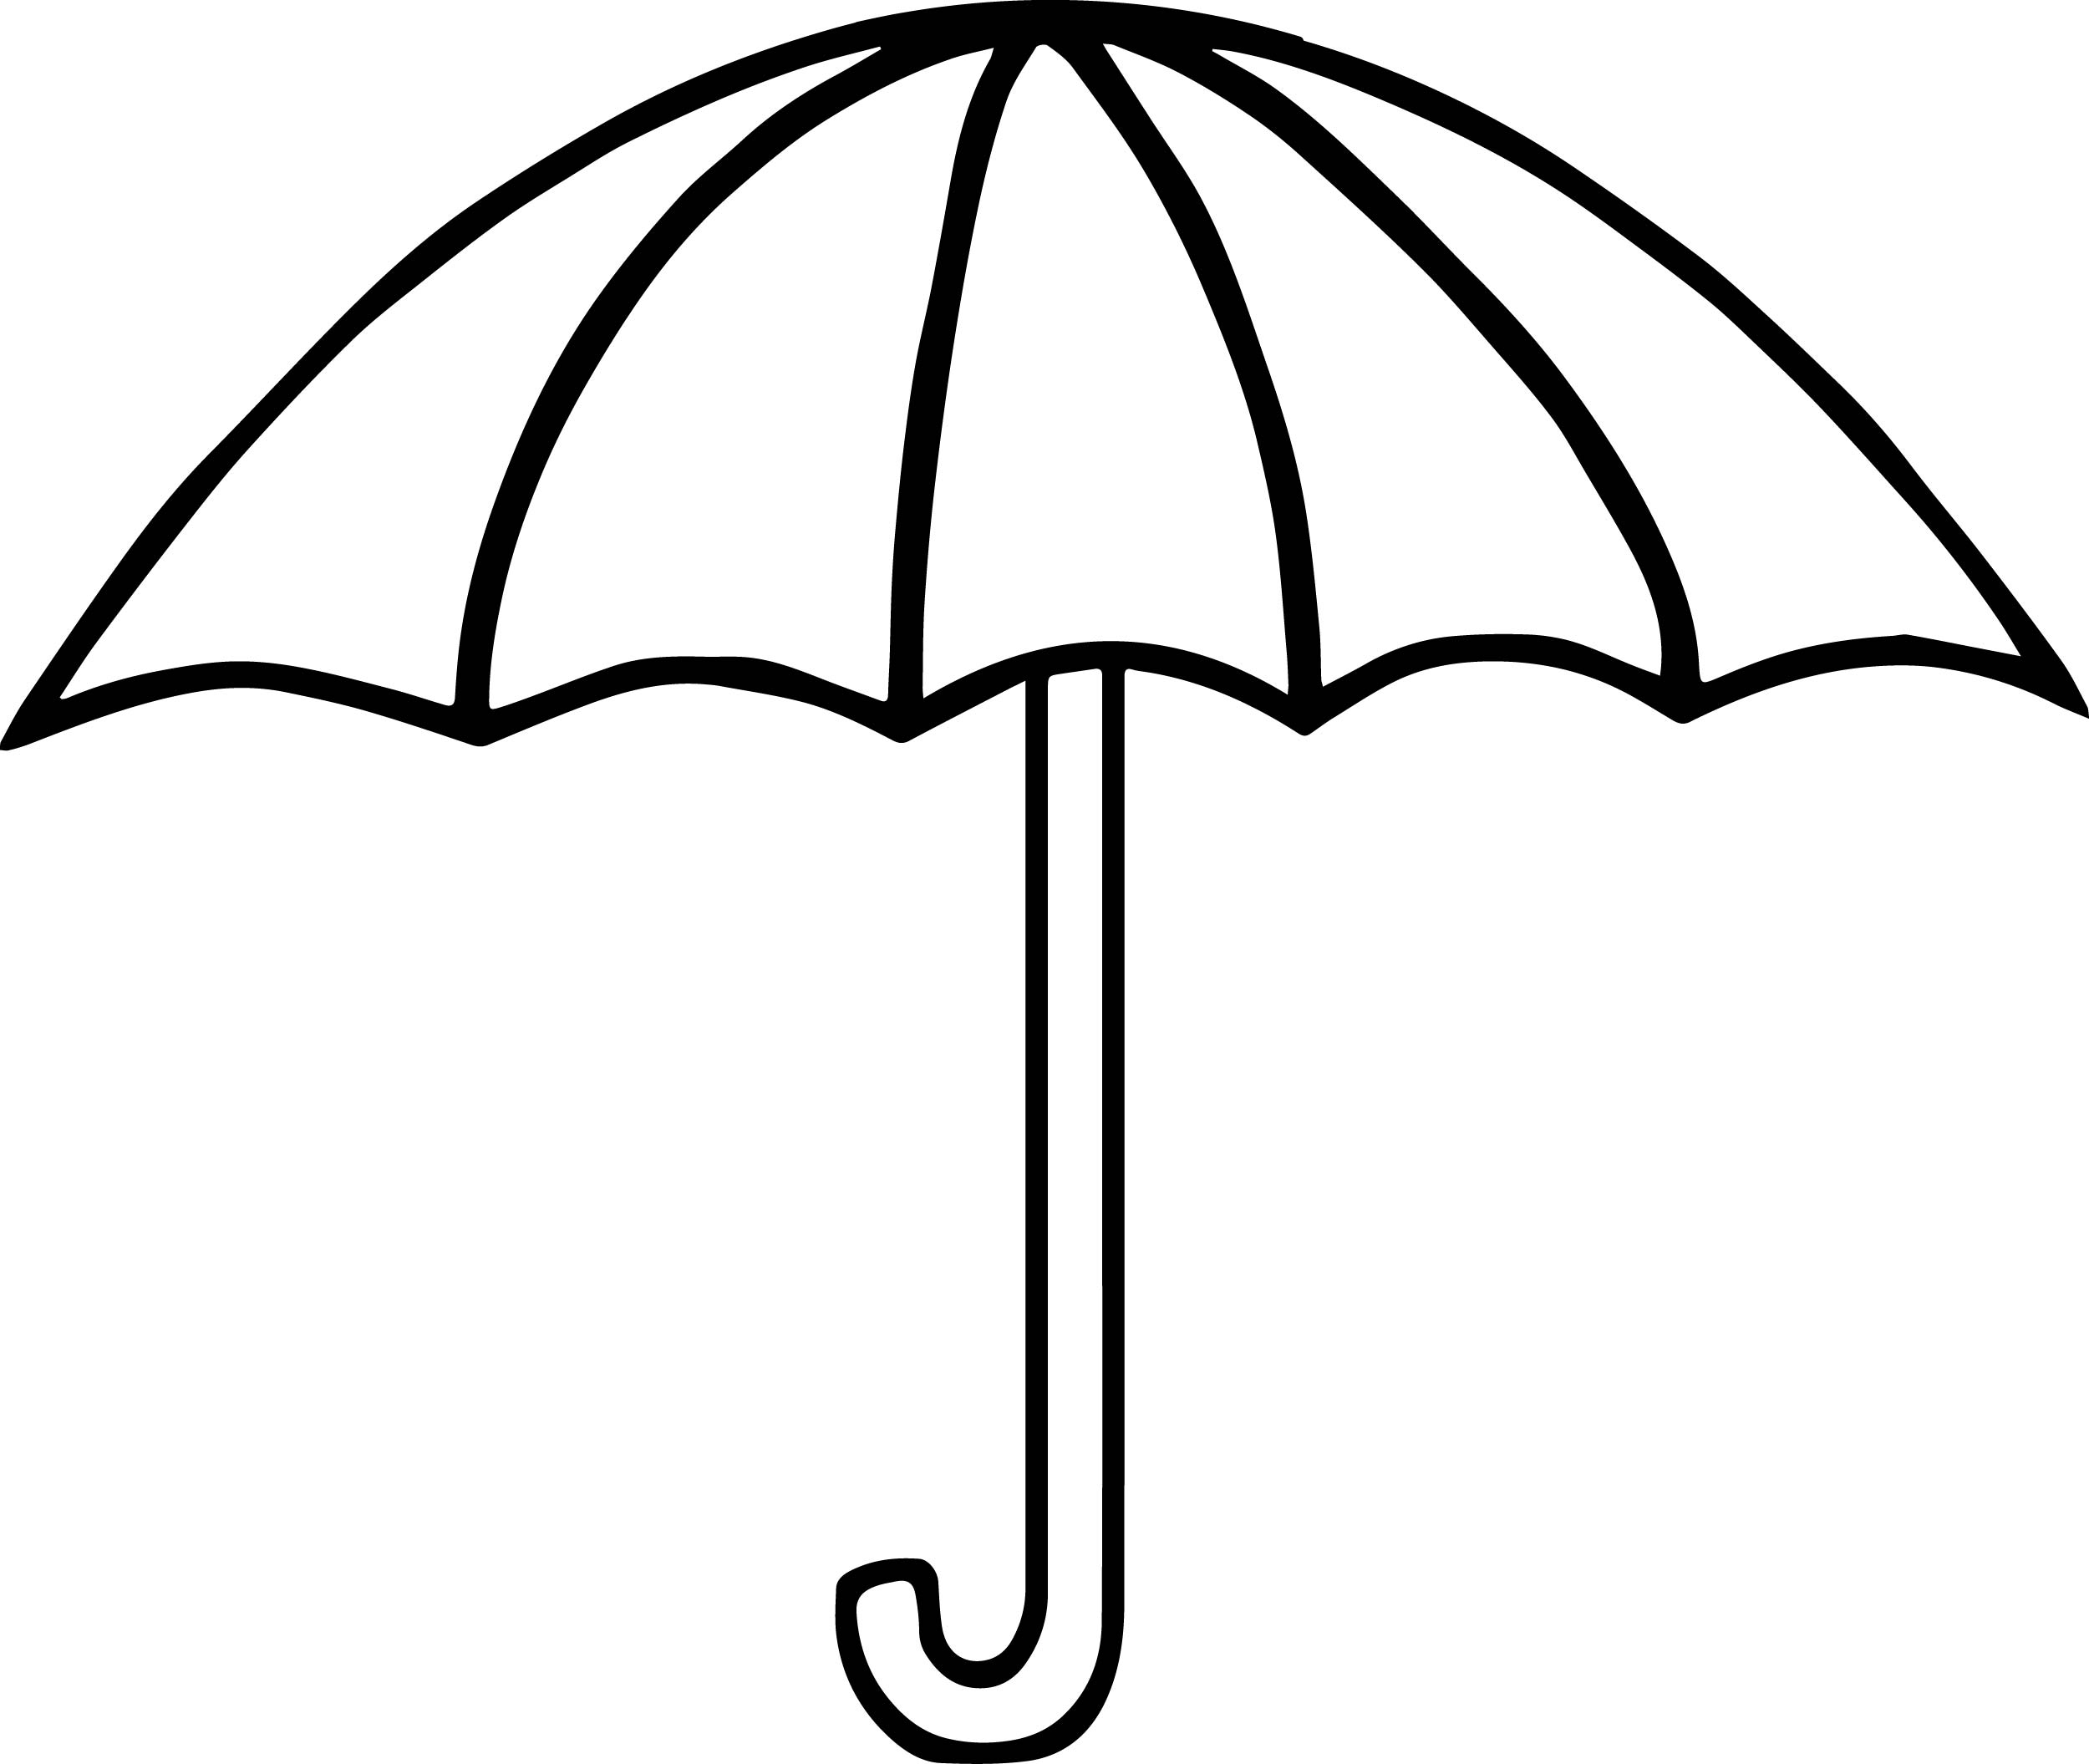 Raindrop Coloring Pages Umbrella Coloring Page Nice Picture Of Raindrop And Best Free